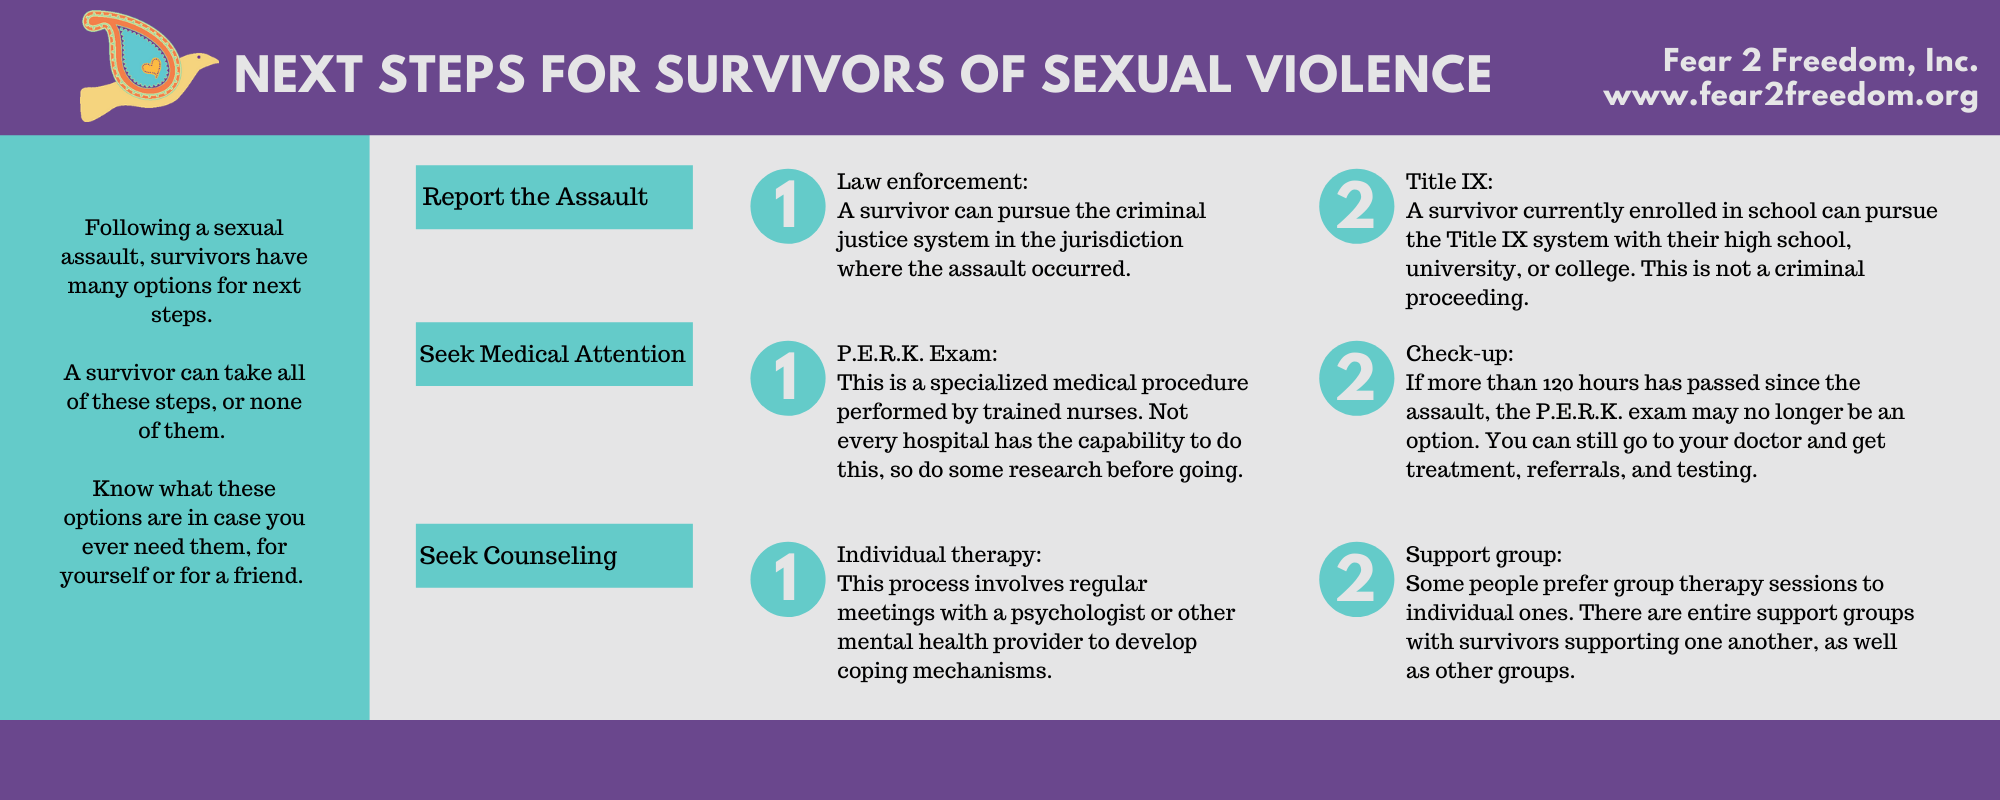 Responding To Sexual Violence Disclosures 5 Dos And Donts — Fear 2 Freedom